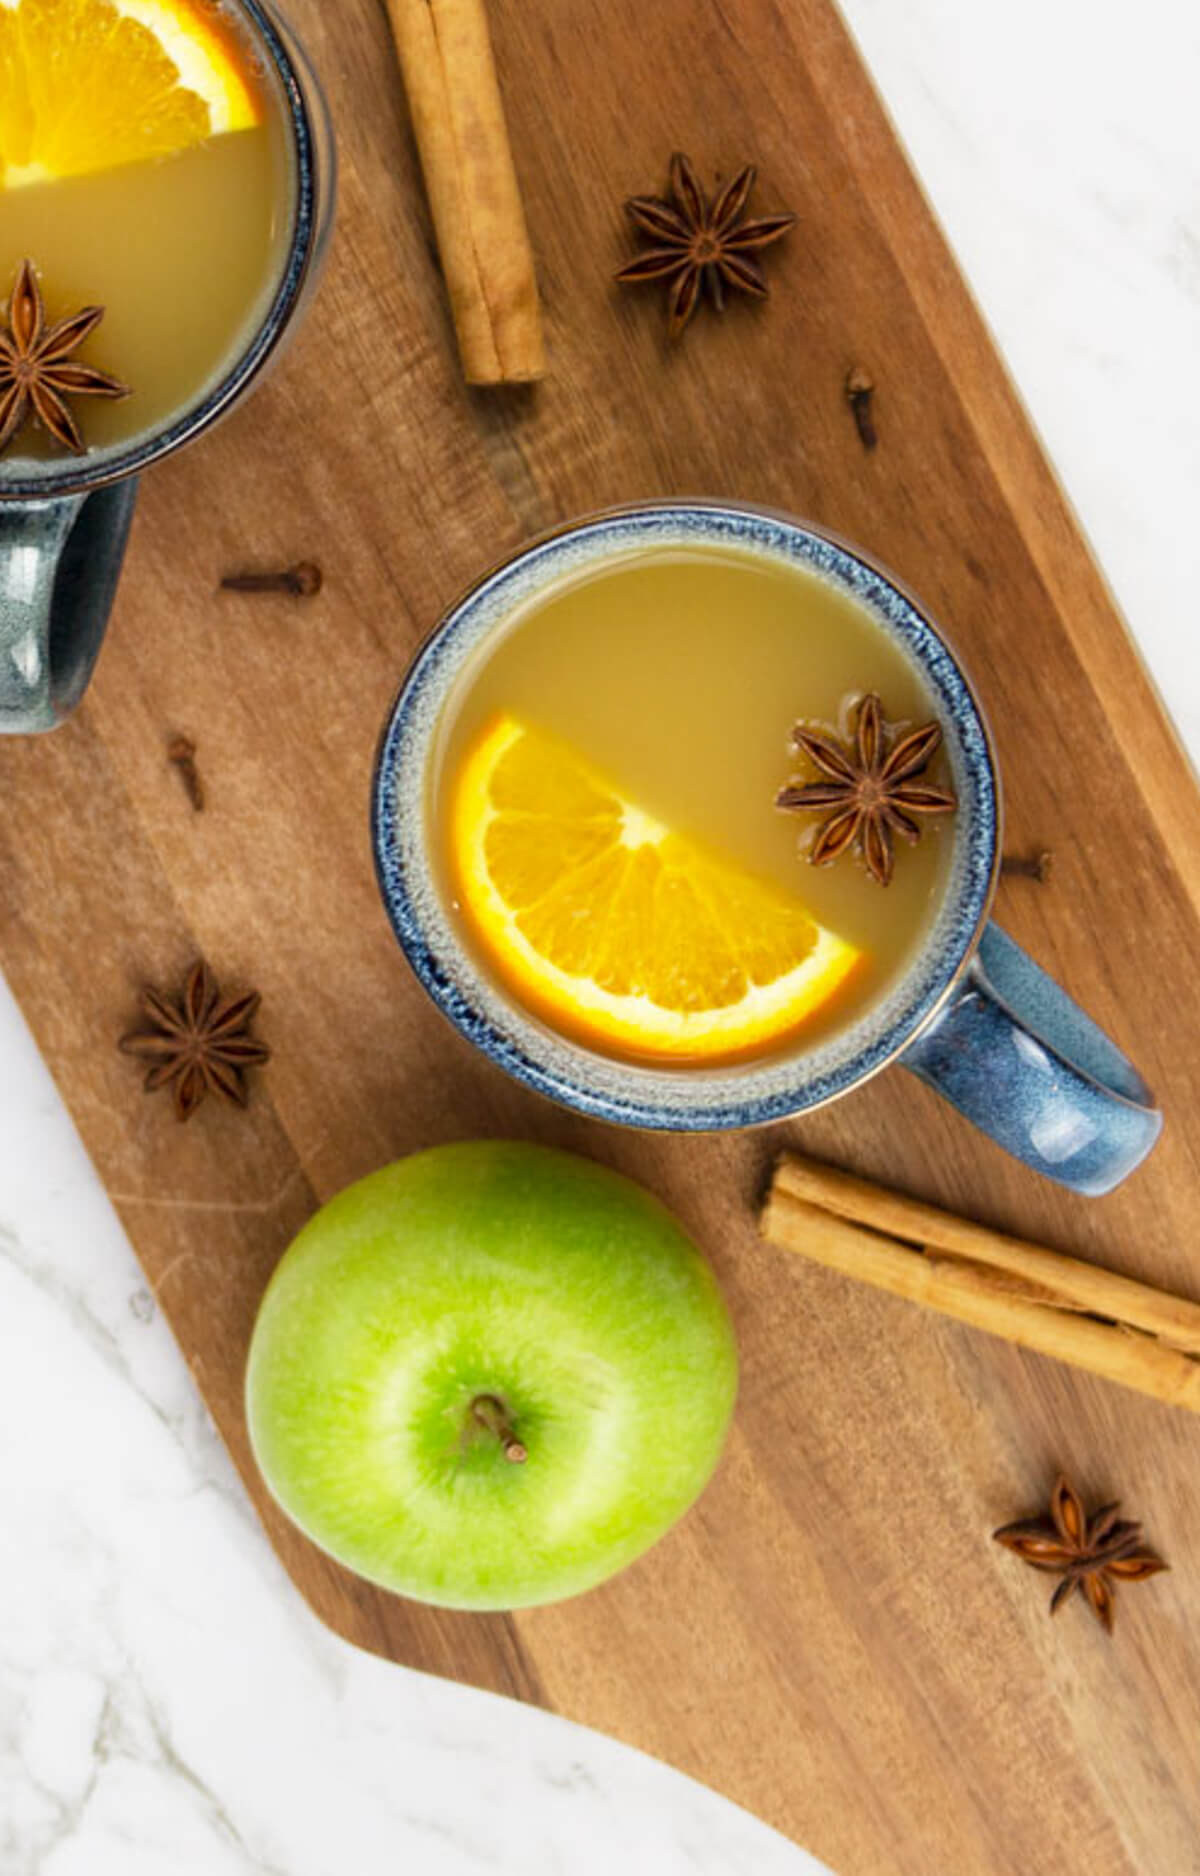 birds eye view of mulled apple cider in blue mugs on a wooden board with a green apple cinnamon sticks and star anise scattered nearby.